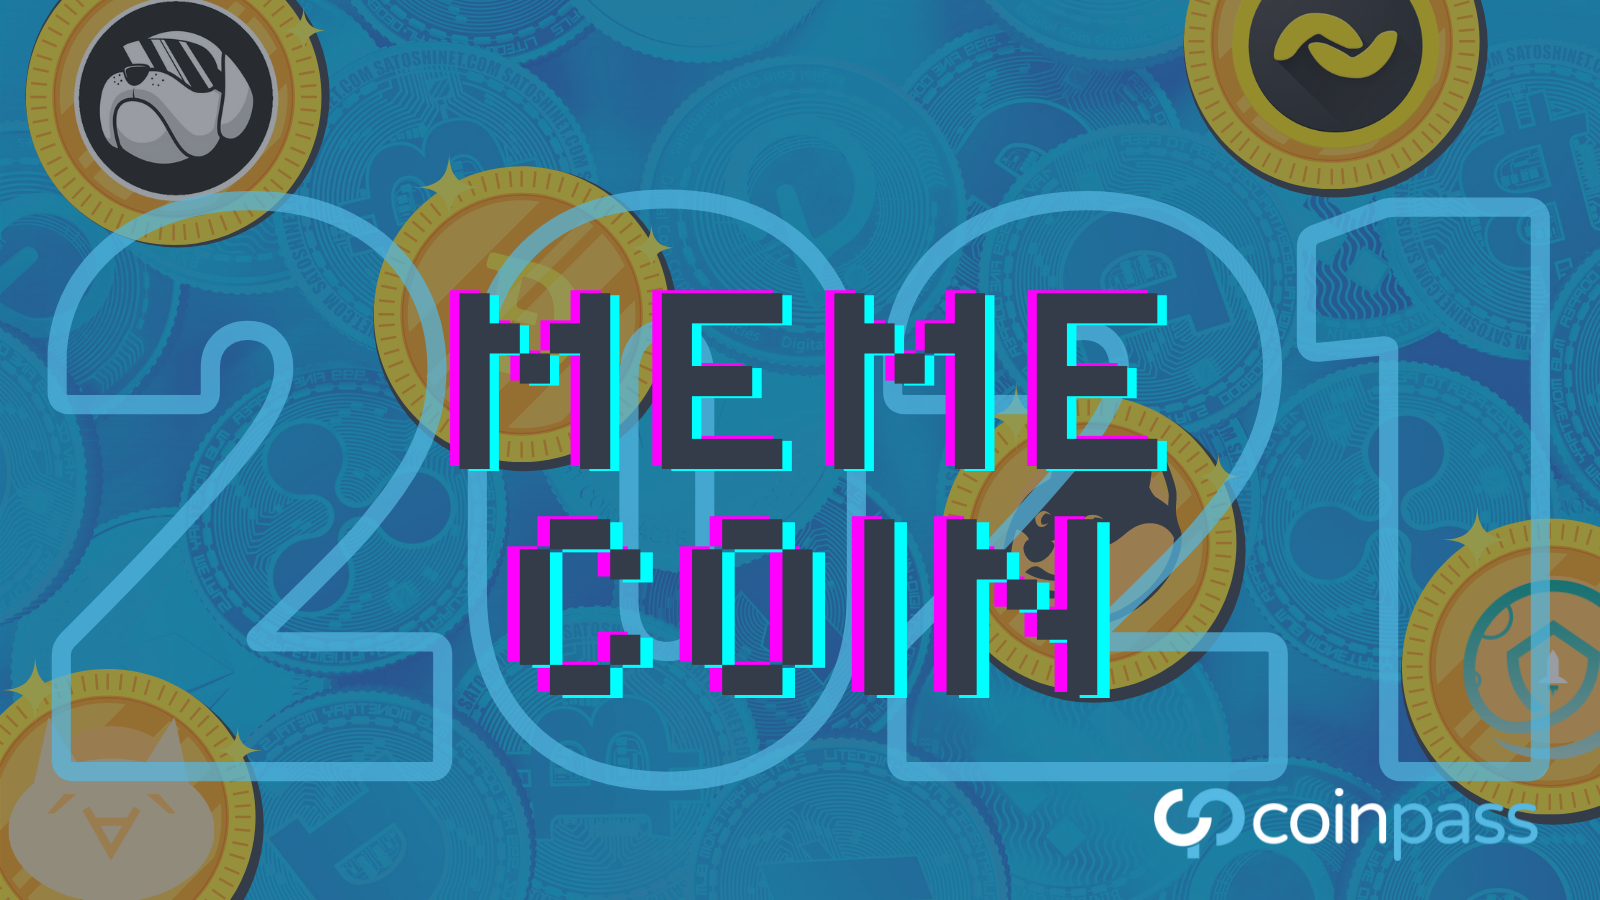 Why are meme tokens so popular in 2021?